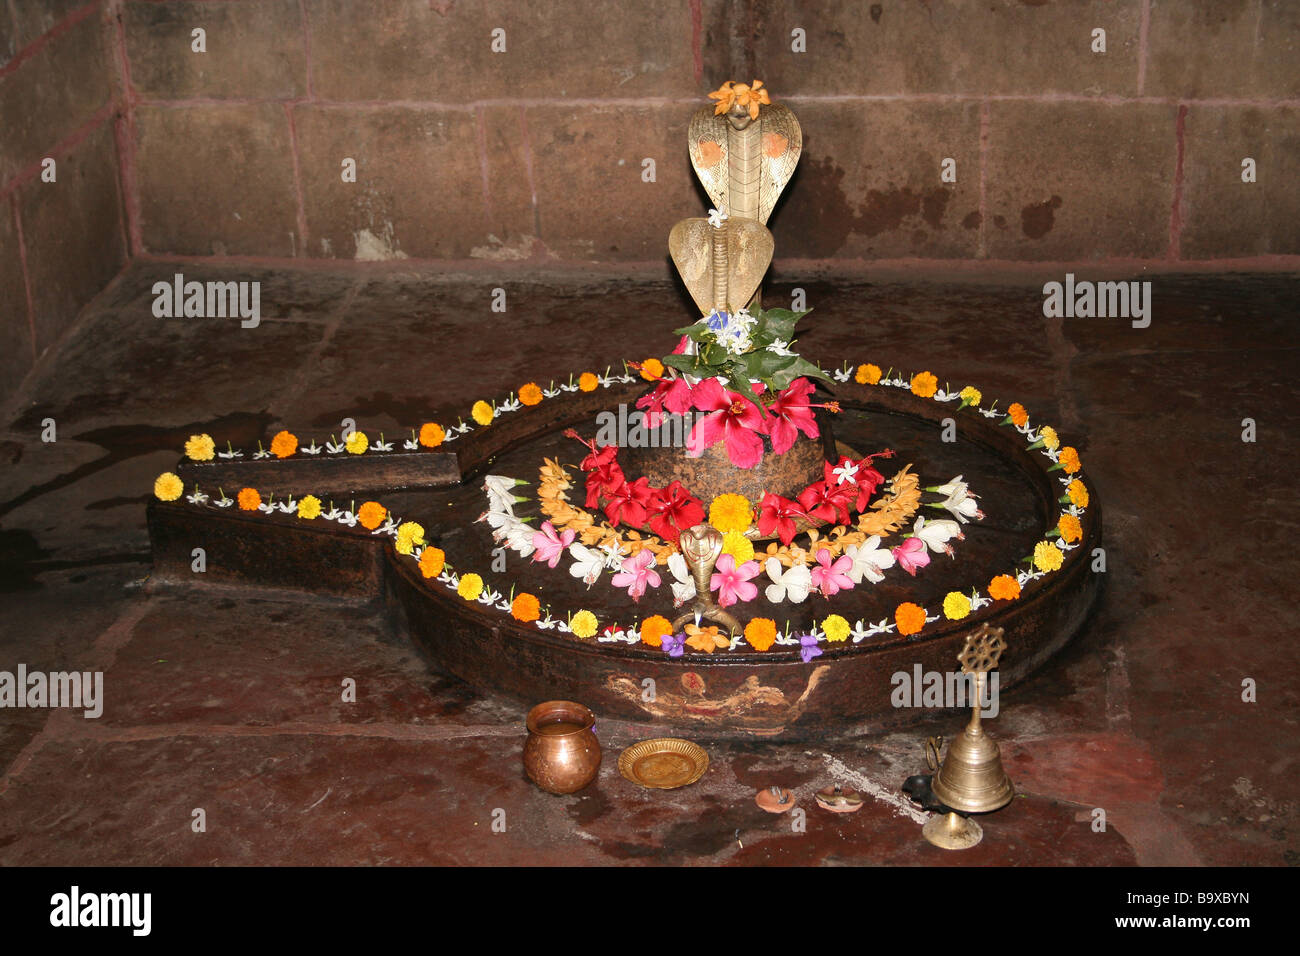 Temple Lingam Shrine With Offerings to Hindu Lord Shiva Stock ...